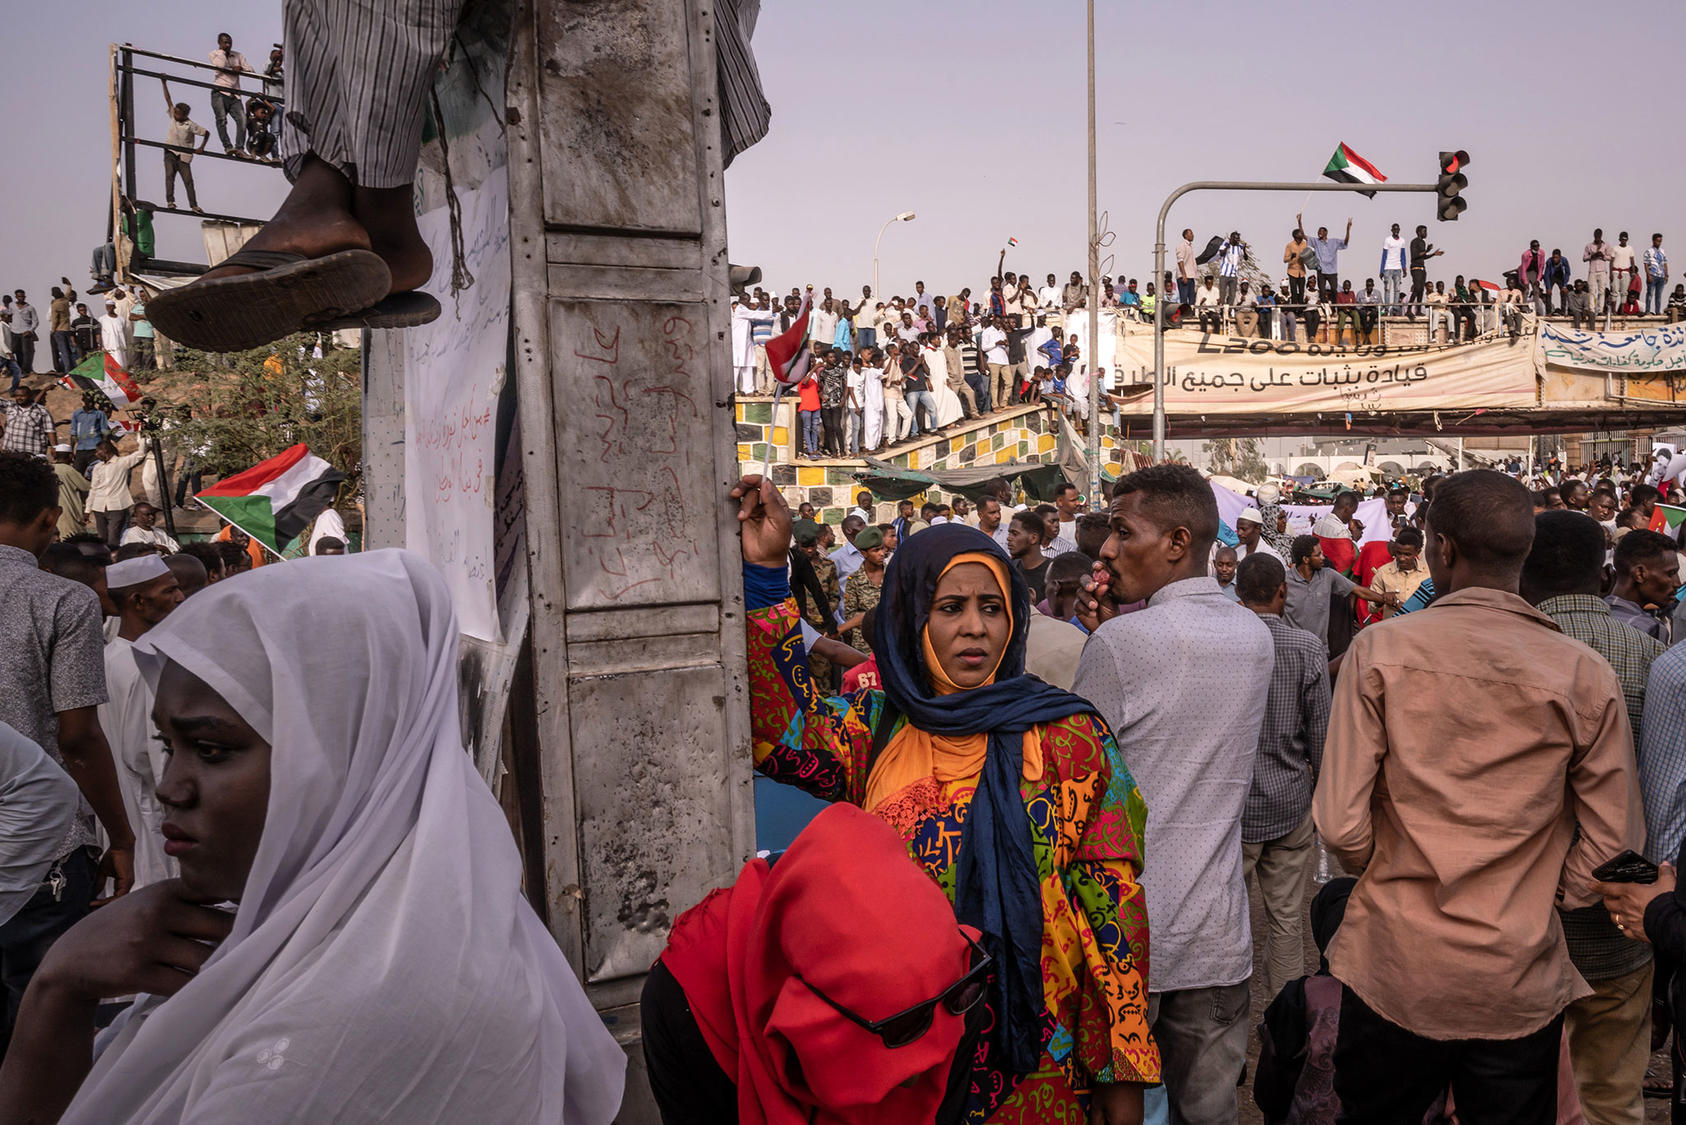 Protesters in Khartoum, Sudan, on April 19, 2019. After the excitement engendered by the overthrow of longtime dictator Omar al-Bashir, Sudan’s transition has faltered amid civilian-military tensions. (Bryan Denton/The New York Times)